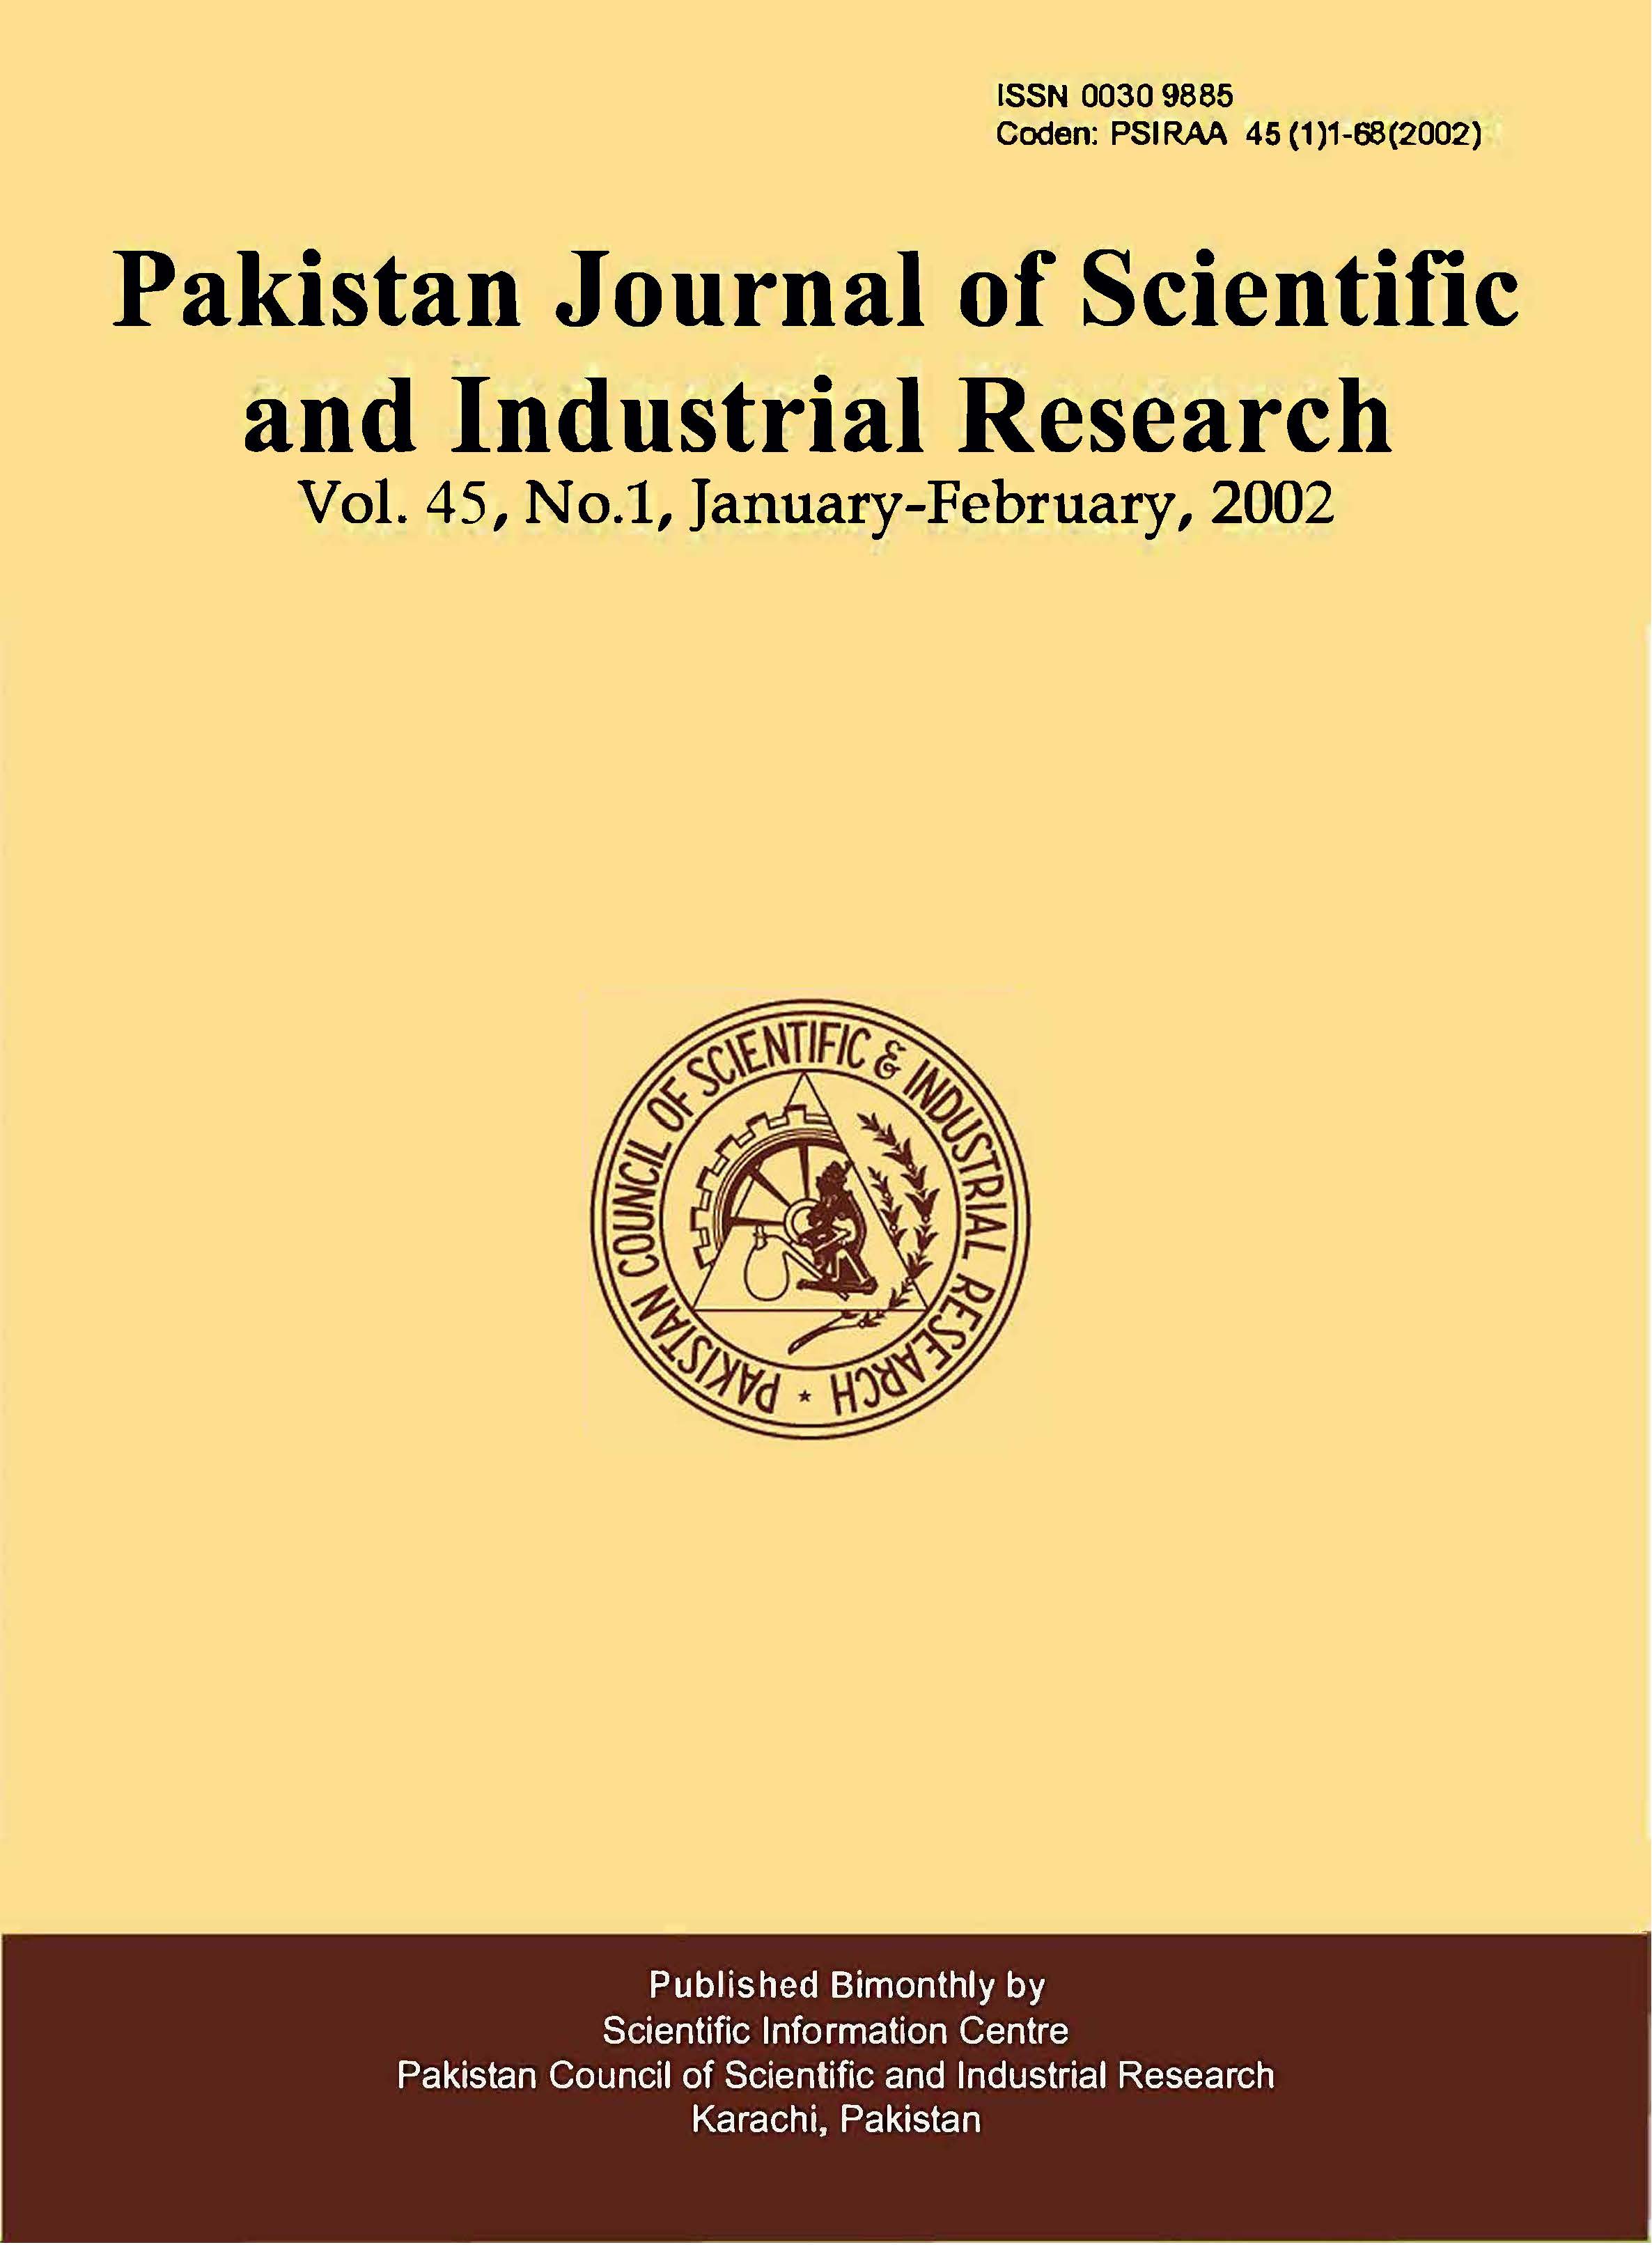 					View Vol. 45 No. 1 (2002): Pakistan Journal of Scientific and Industrial Research
				